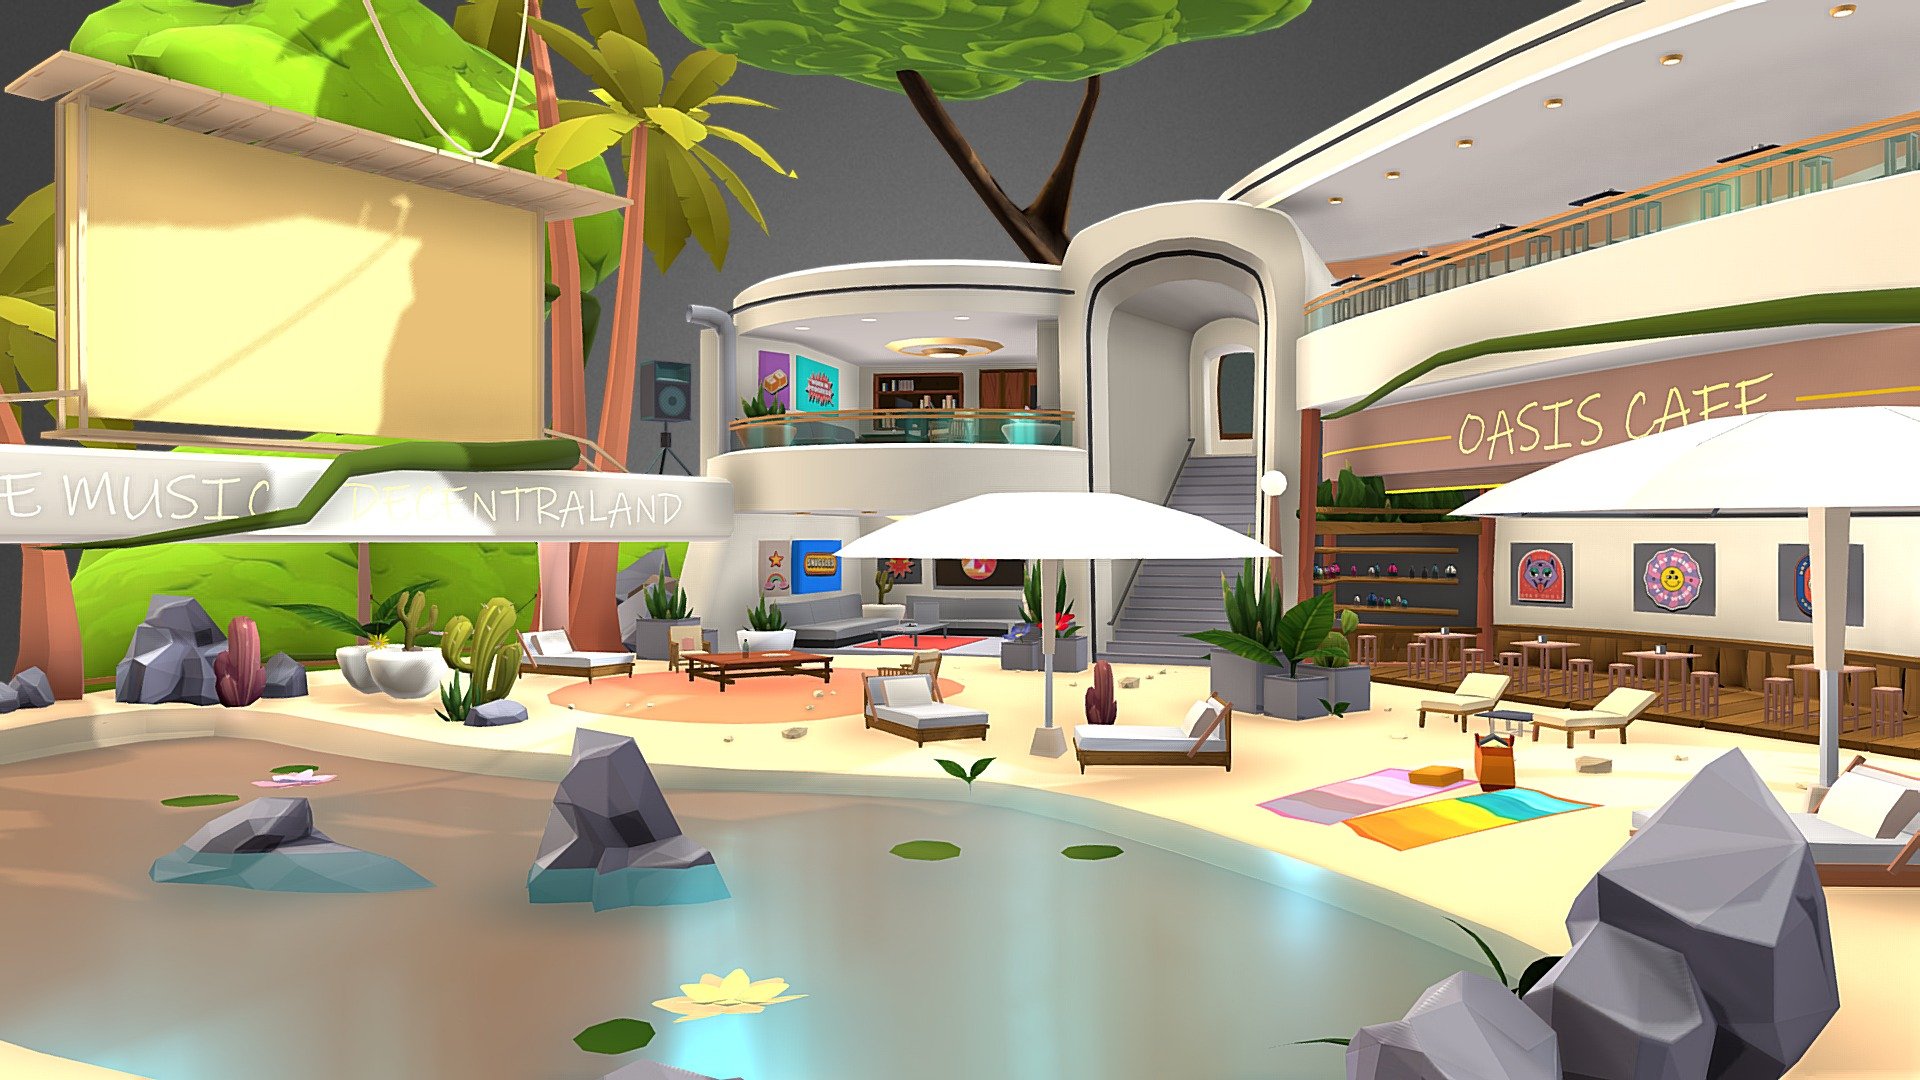 Welcome to the Digital Nomad's Oasis, the final stop on the End of Year 2023 Quest. Located at the top of the tree, you can find a multiplayer pixel canvas here, screens for live music, and different chill out options. 

Play the quest in Decentraland  at coordinates: 148, -100

Created by FGR3D, MaHa, Inihility and KJ Walker of LowPolyModels for the End Of Year 2023 Quest in Decentraland 3d model